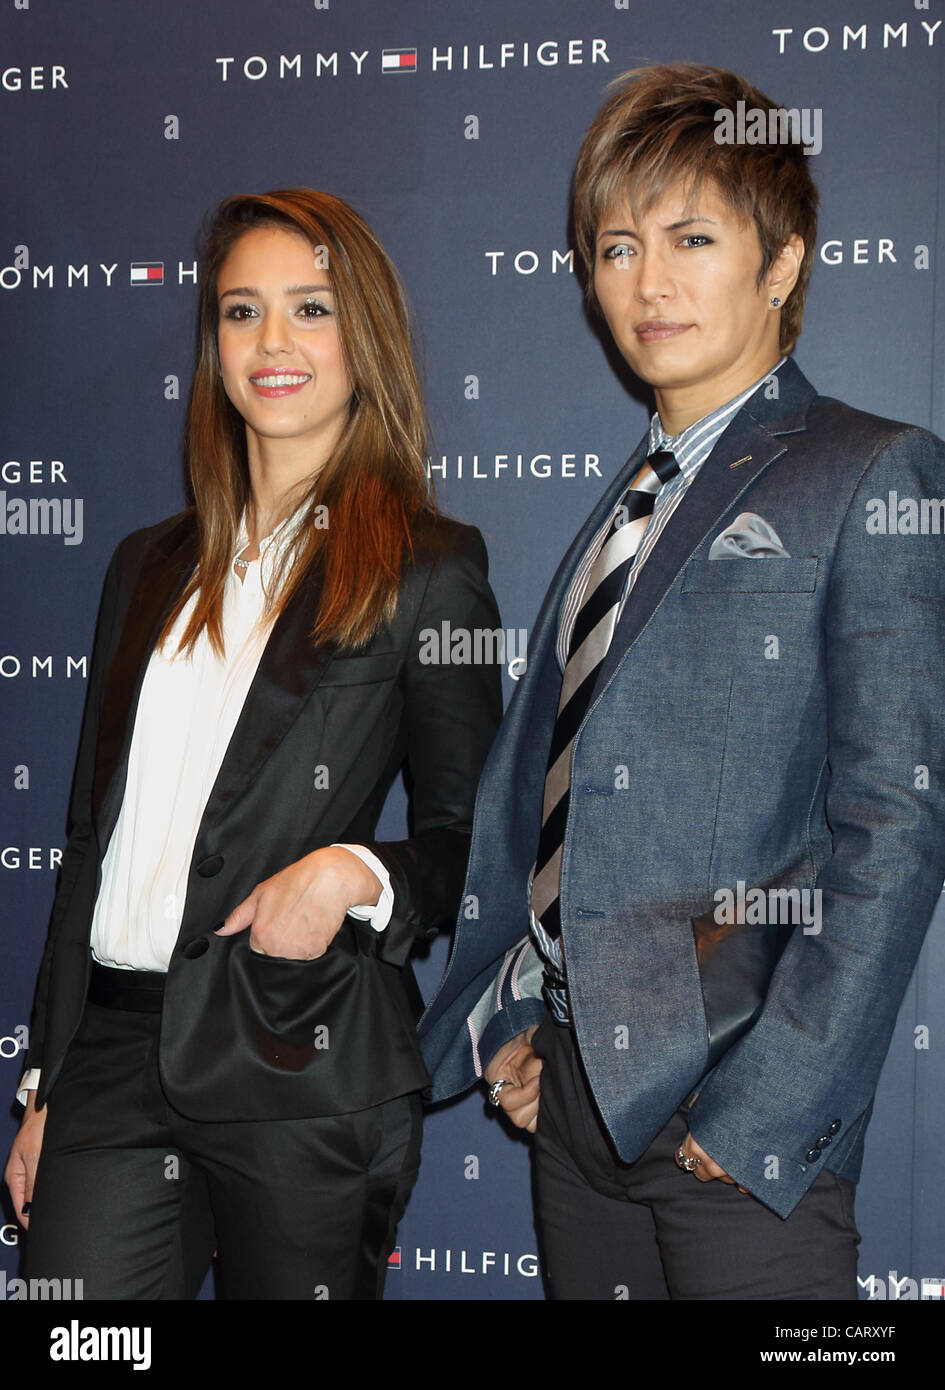 Jessica Alba, Gackt, Apr 16, 2012 : attend 'Tommy Hilfiger' Omotesando  Fkagship Store opening, 16 Apr 2012 Tokyo Japan [Total 12 pictures] Stock  Photo - Alamy